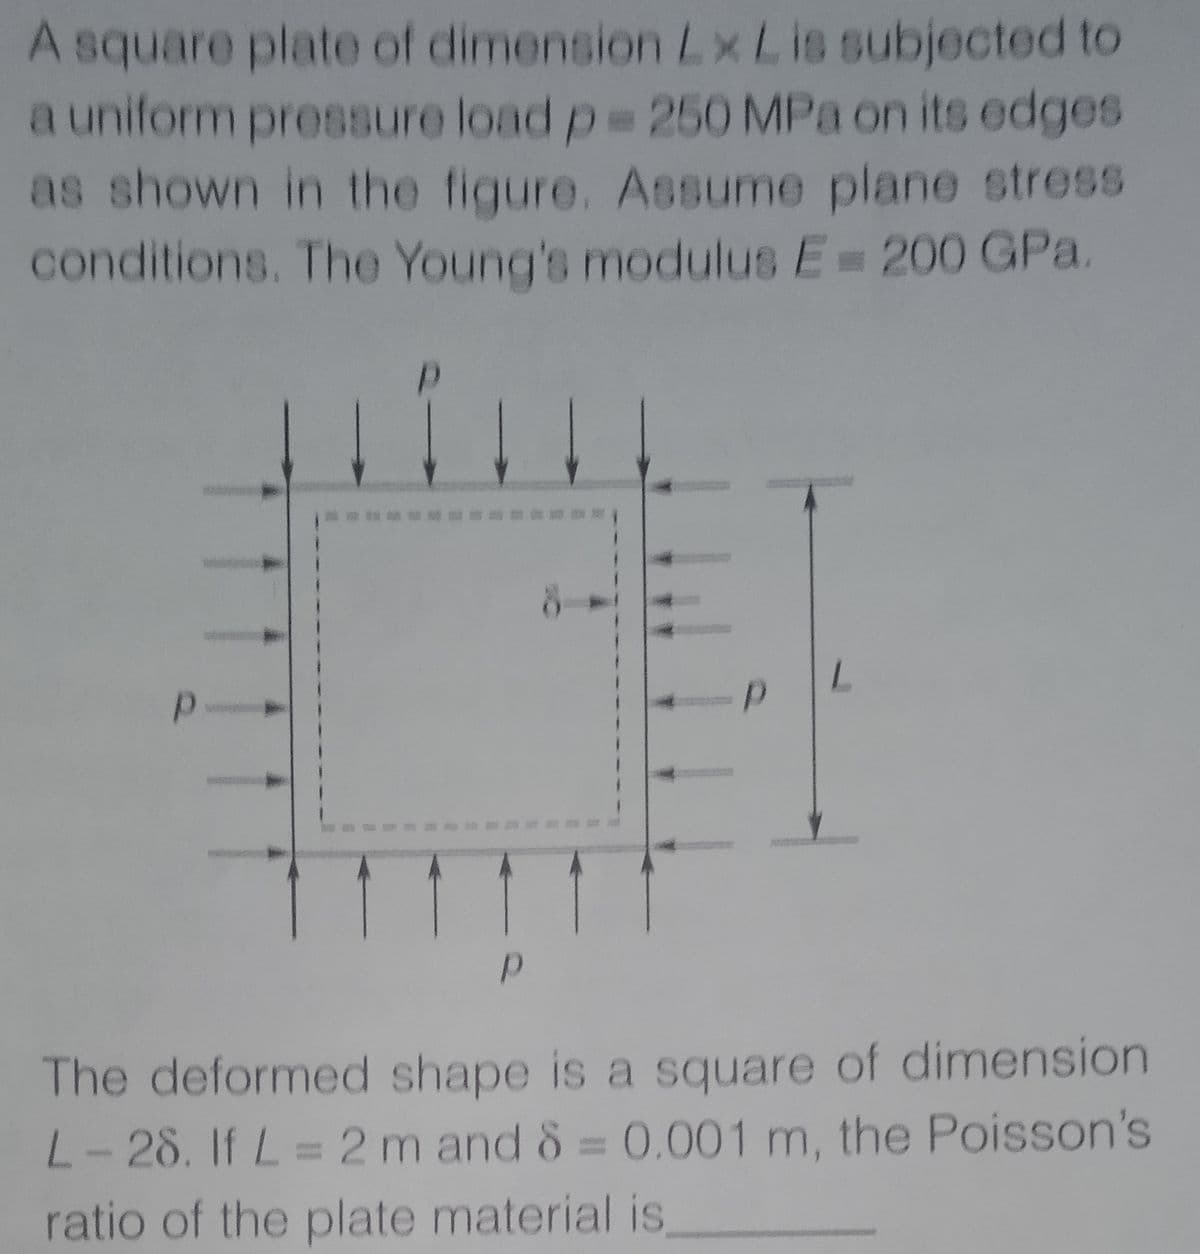 A square plate of dimension LxLis subjected to
a uniform pressure load p 250 MPa on its edges
as shown in the figure. Assume plane stress
conditions. The Young's modulus E=200 GPa.
7.
The deformed shape is a square of dimension
L-28. If L = 2m and 8 = 0.001 m, the Poisson's
ratio of the plate material is
